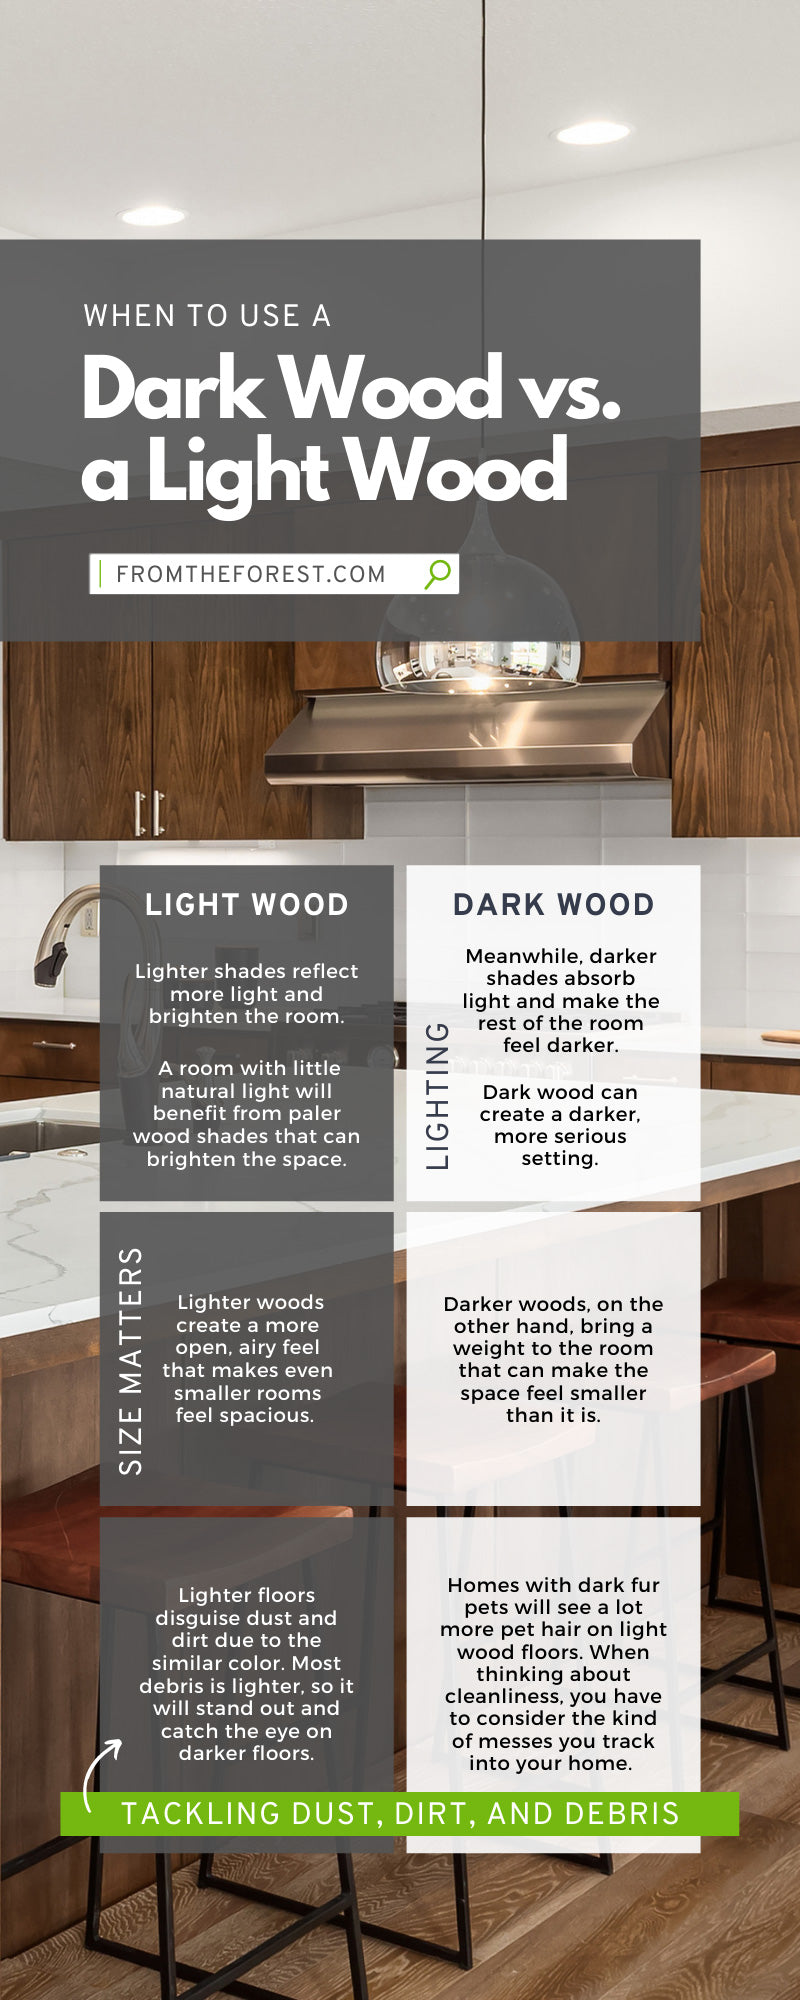 When To Use a Dark Wood vs. a Light Wood